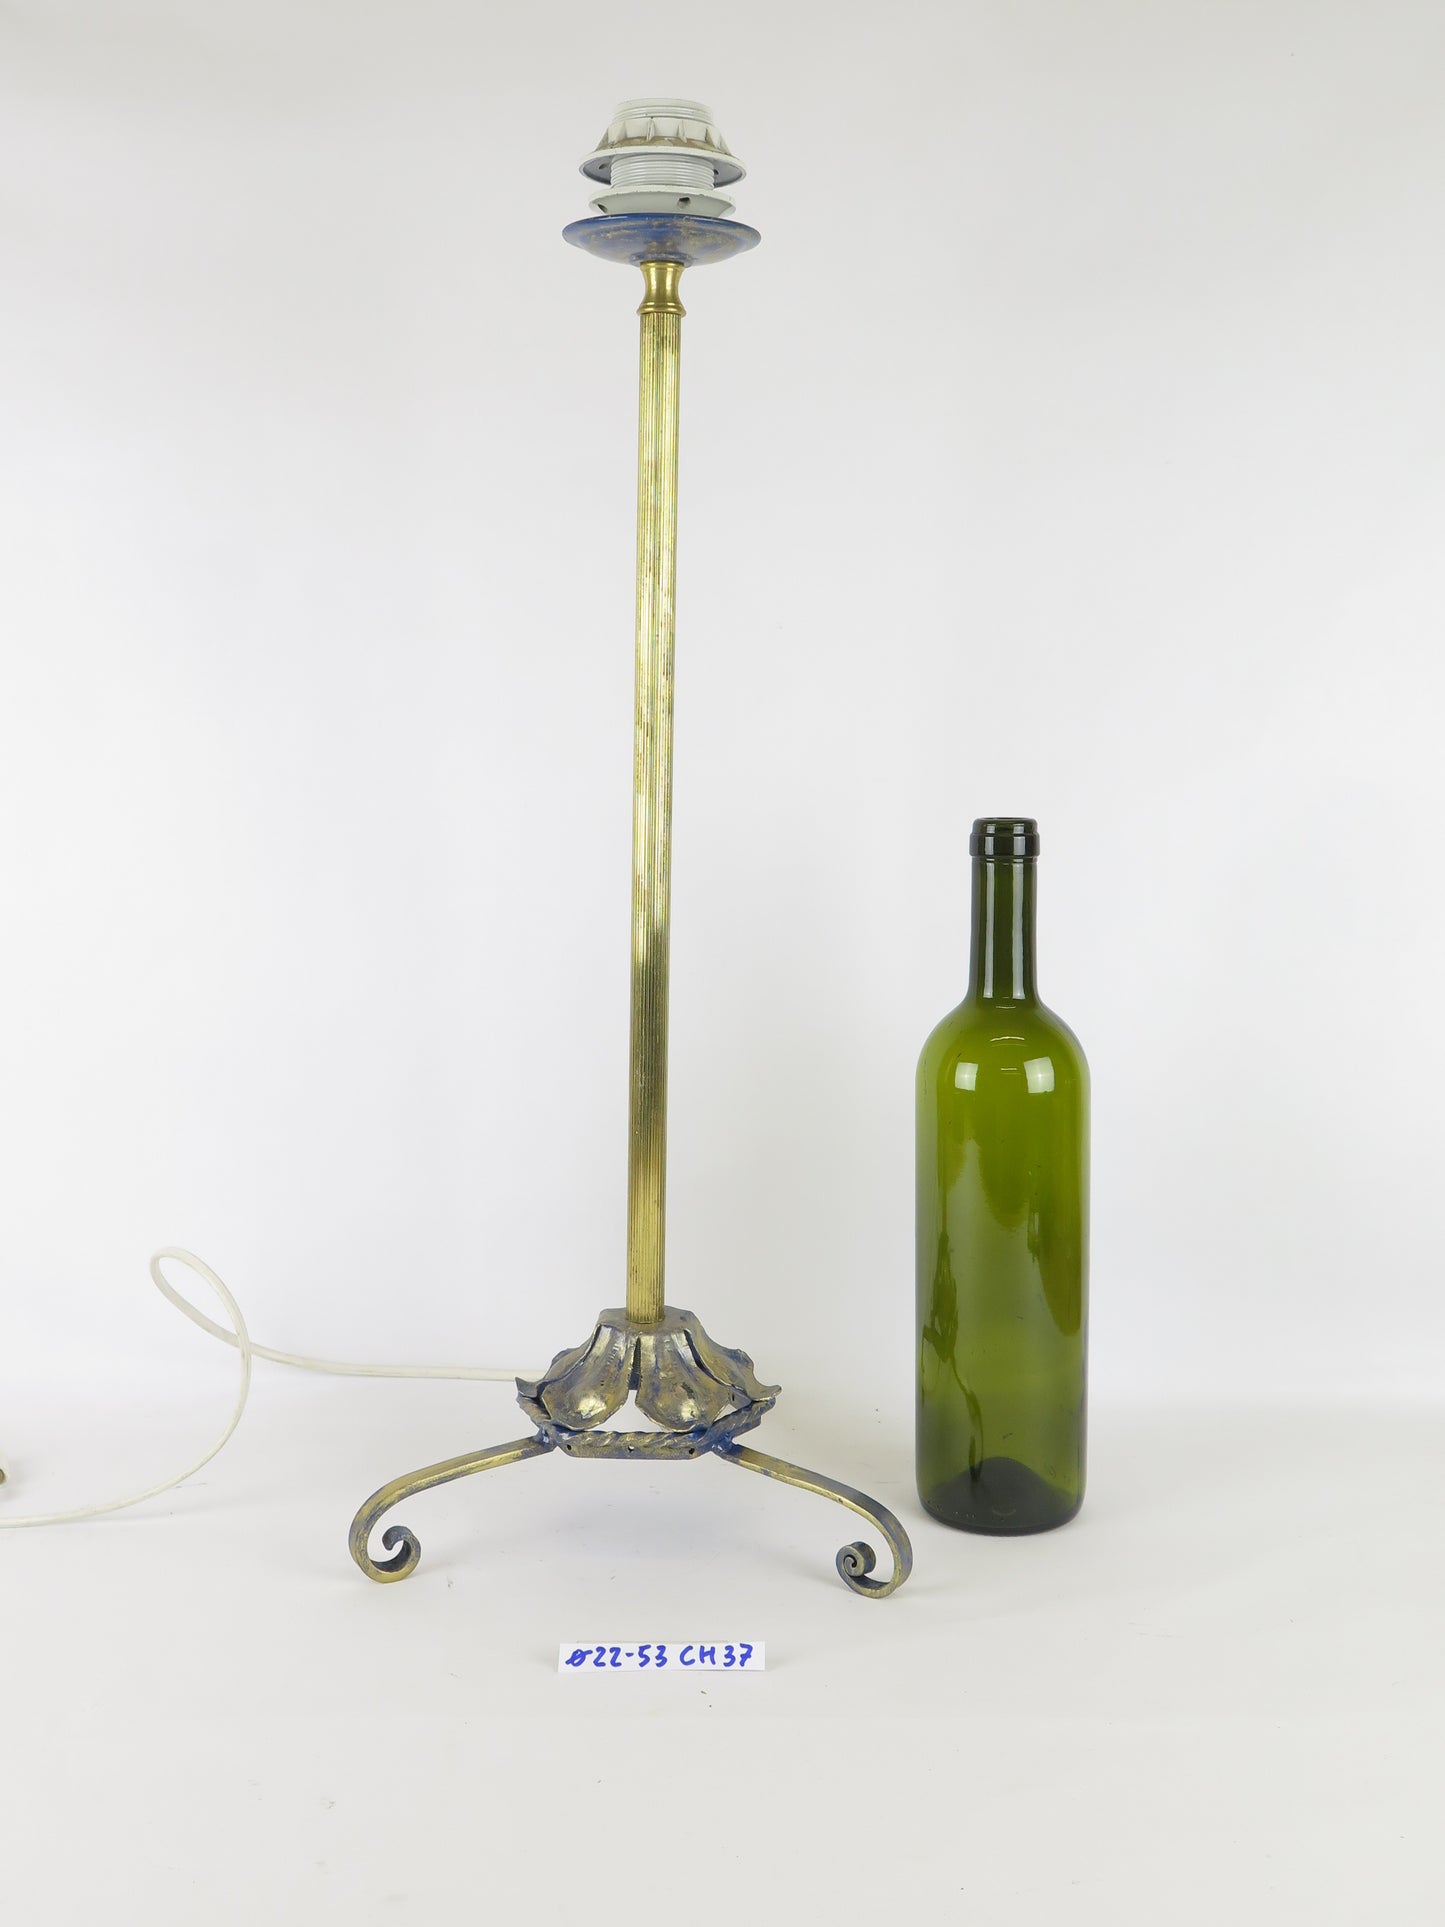 VINTAGE TABLE LAMP WROUGHT IRON EMBOSSED METAL ELEGANT CLASSIC CH37